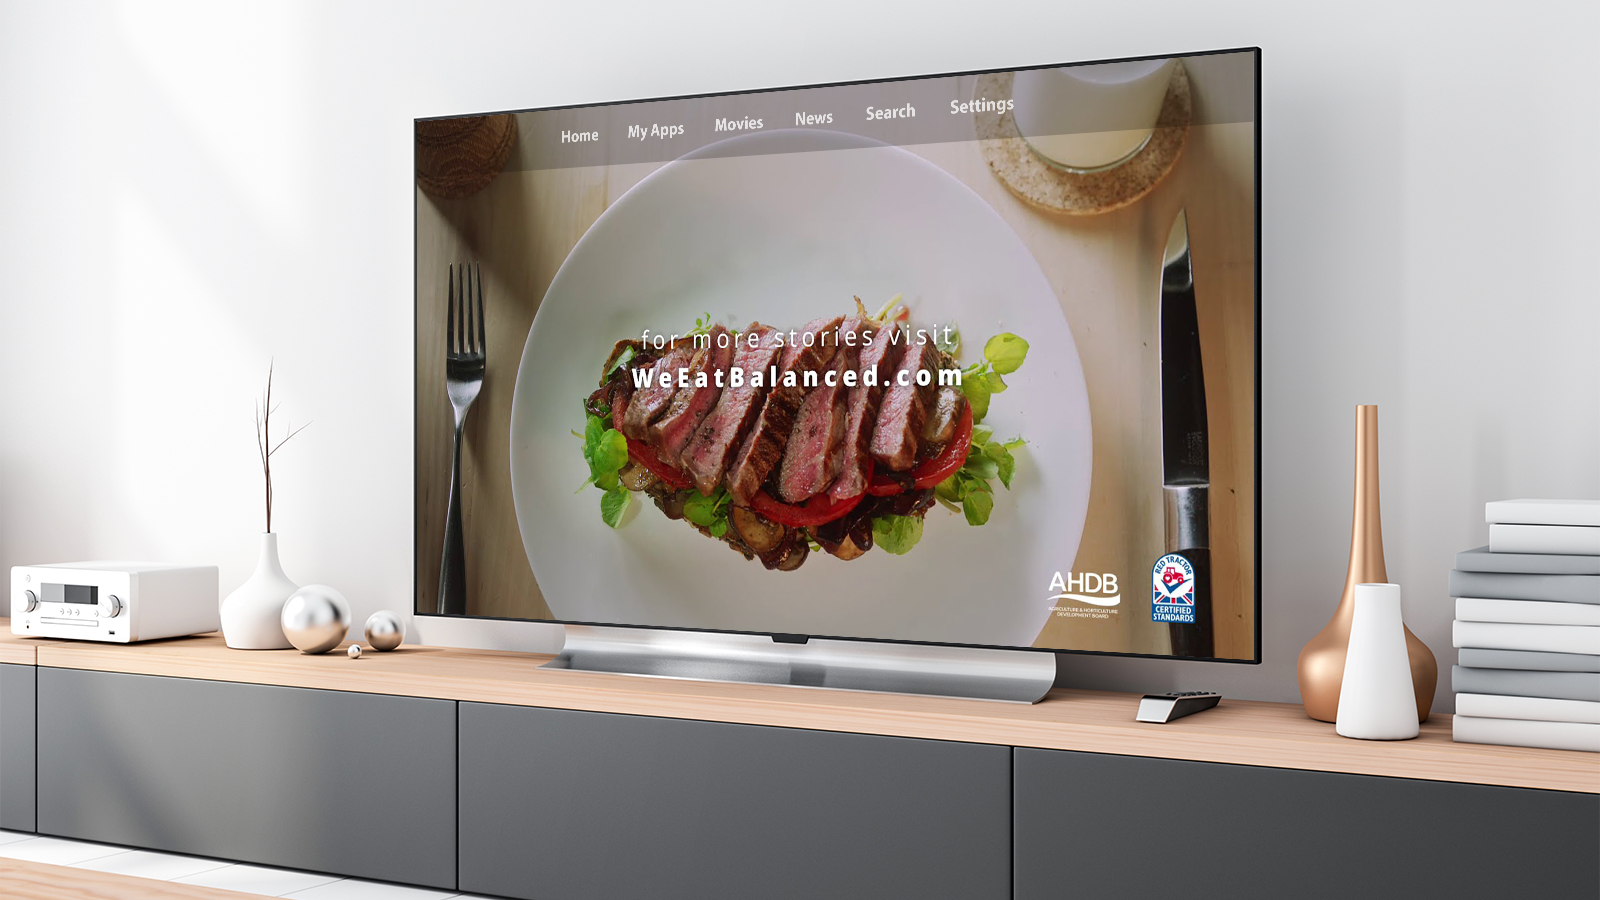 Advertising Standards Authority Receives Complaint Over Pro-Meat TV Ad